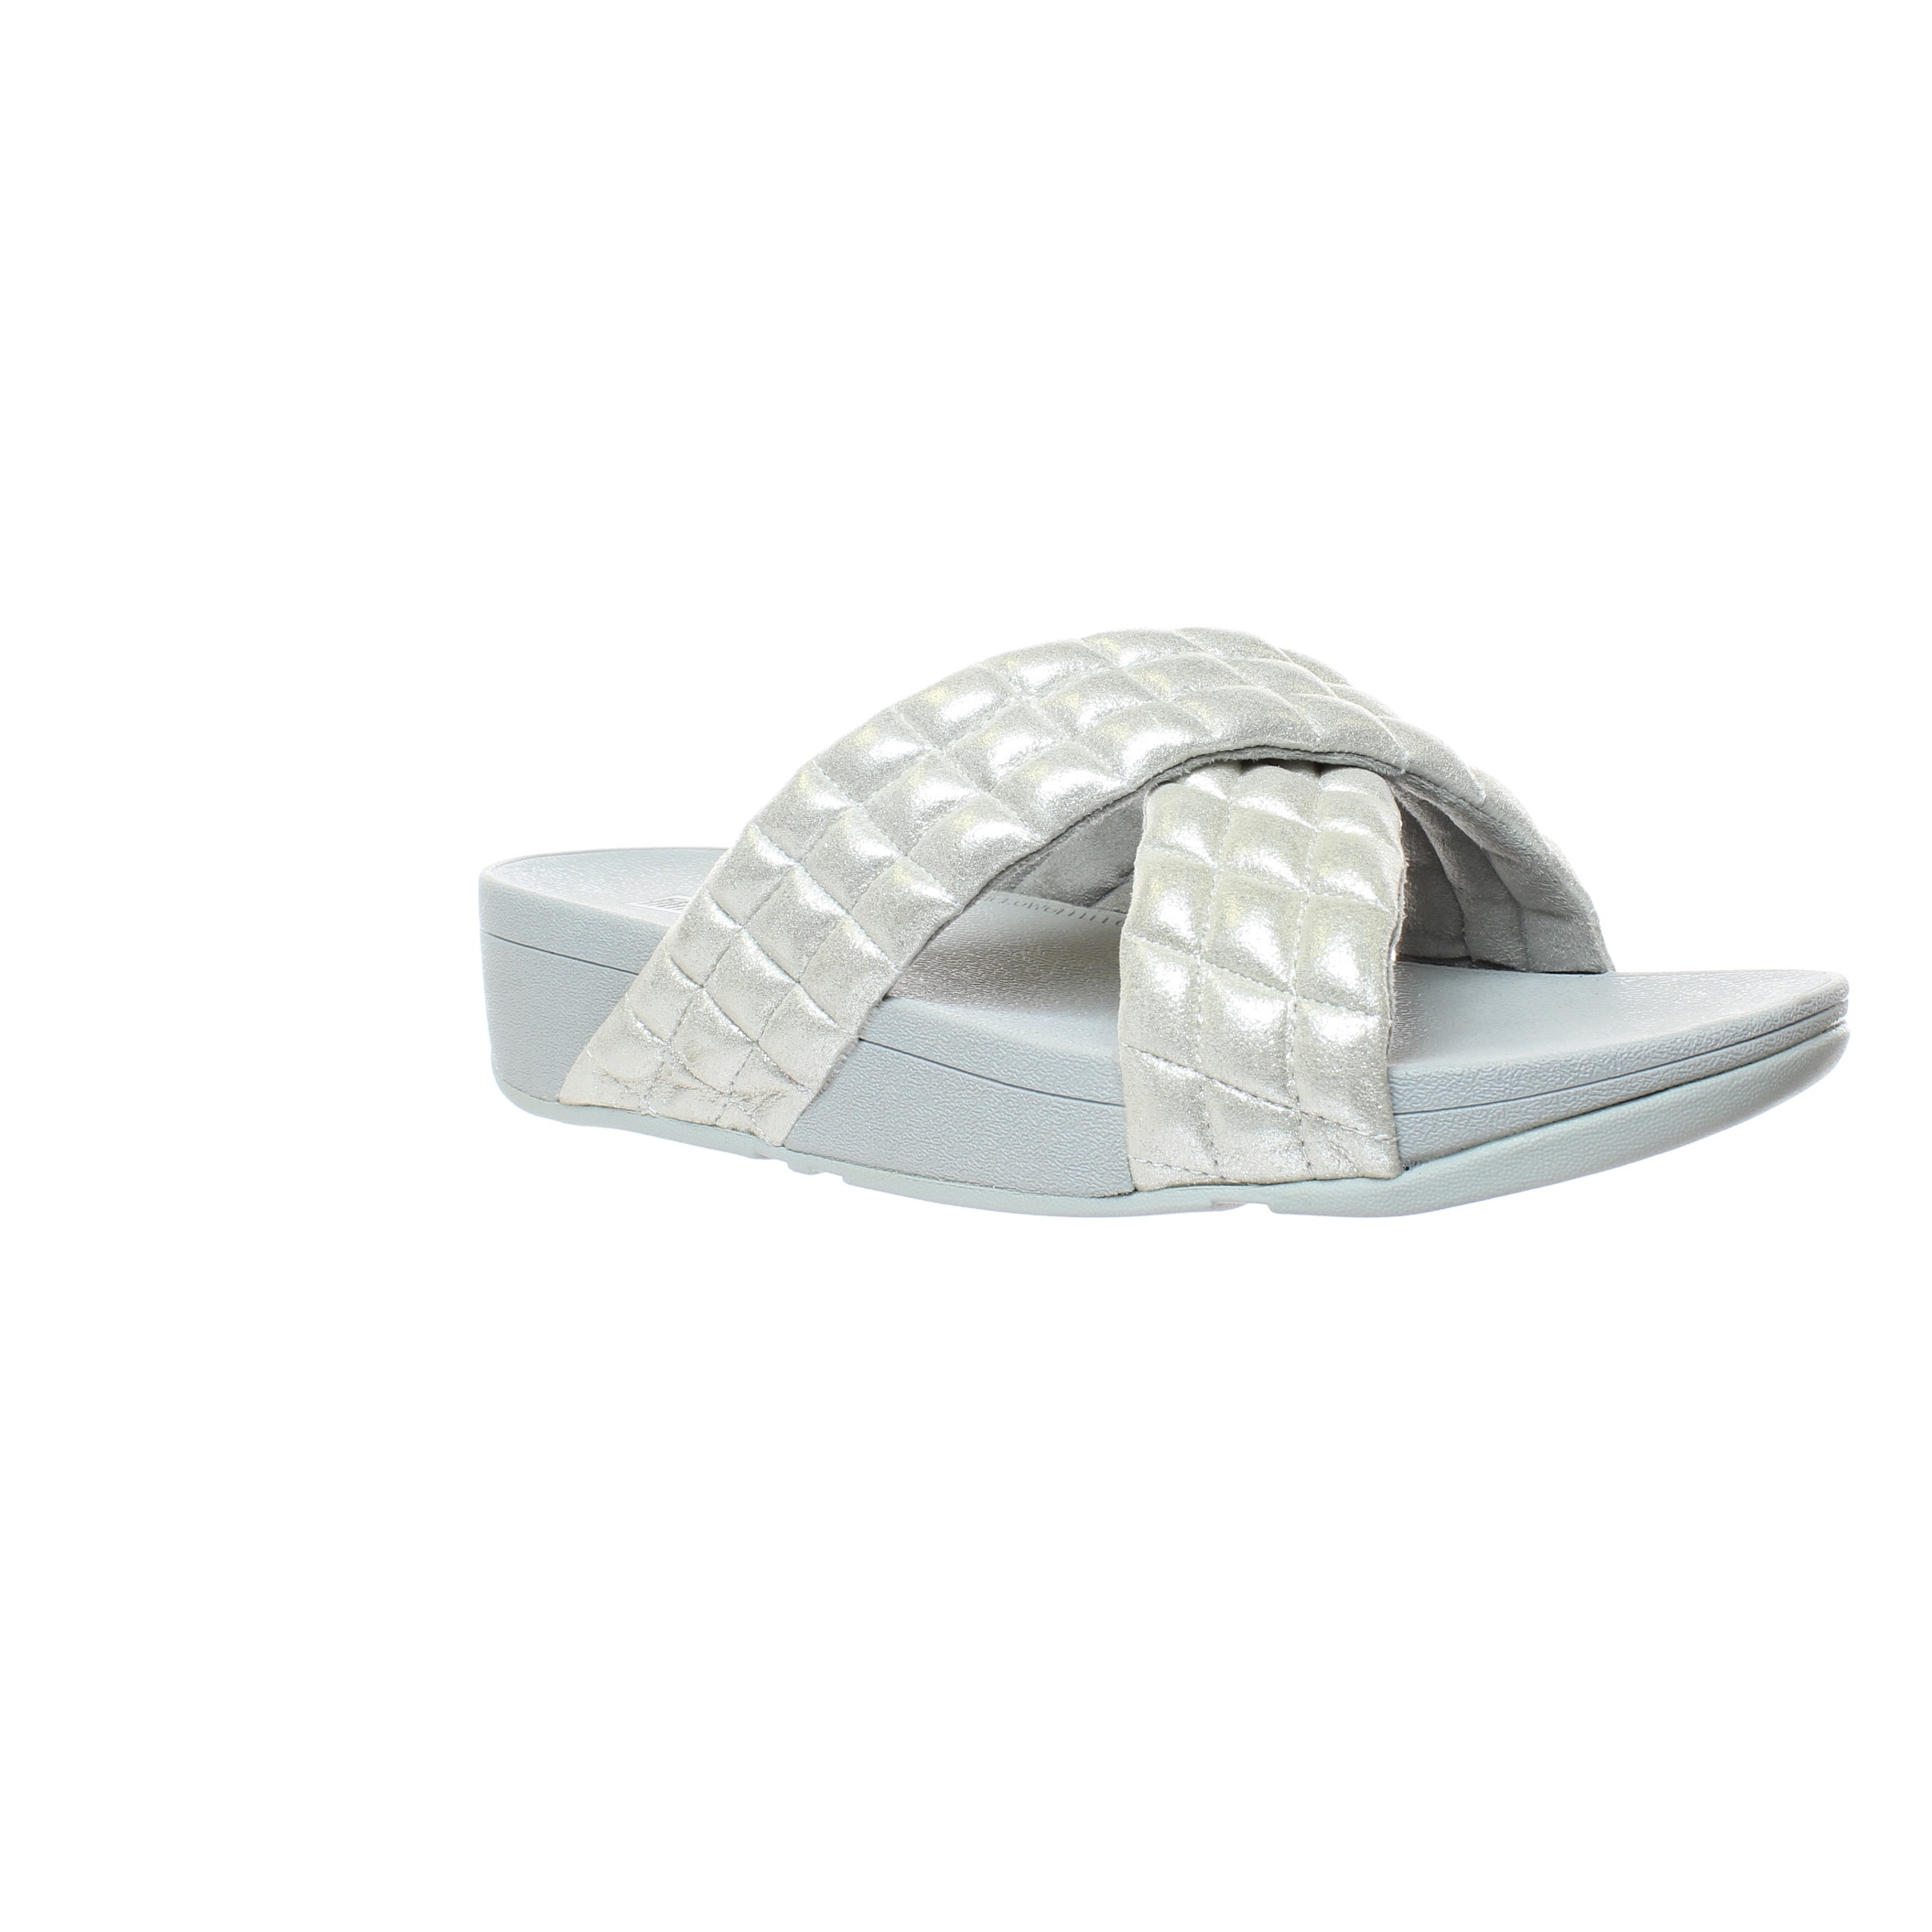 silver sandals size 11